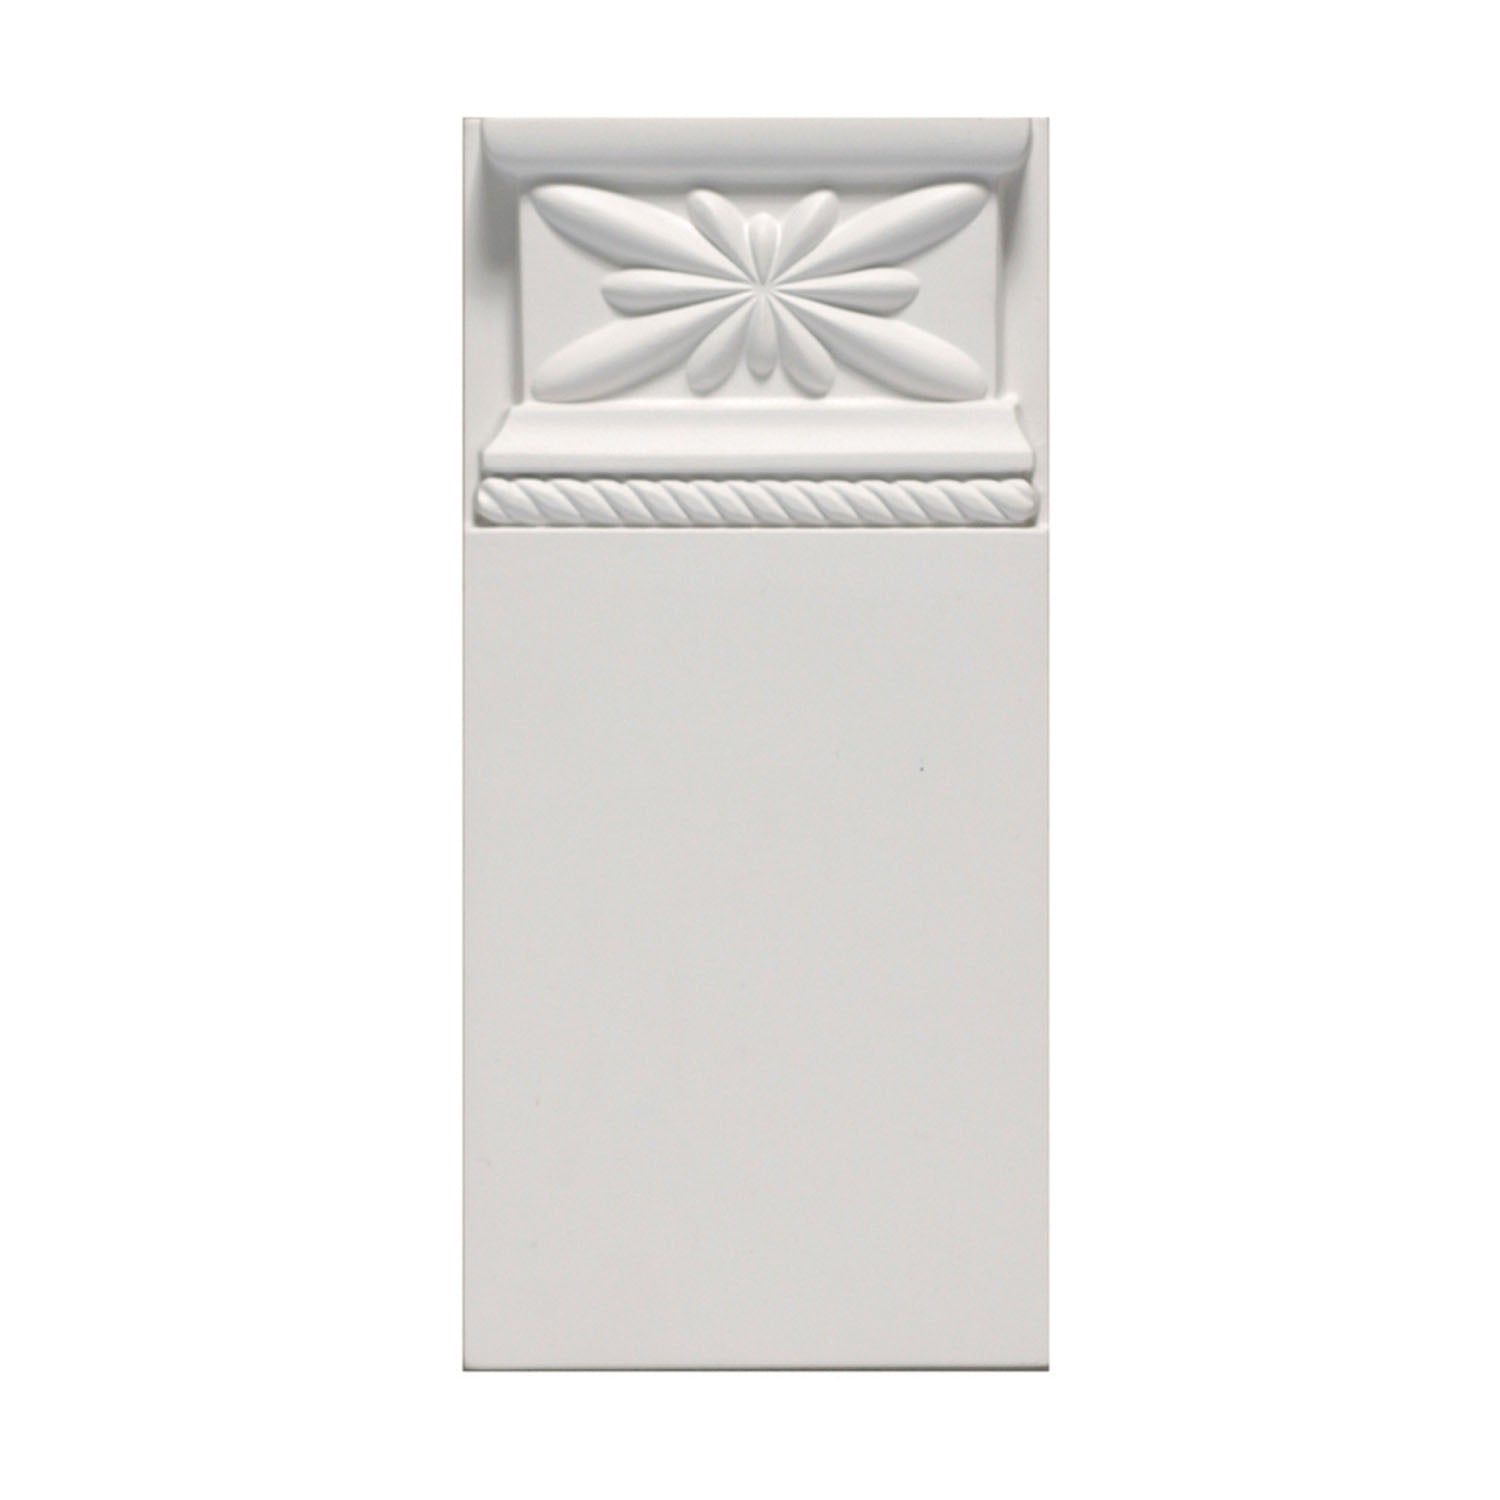 Focal Point Lighting 98910 Pilasters Anatole Plinth Decor White